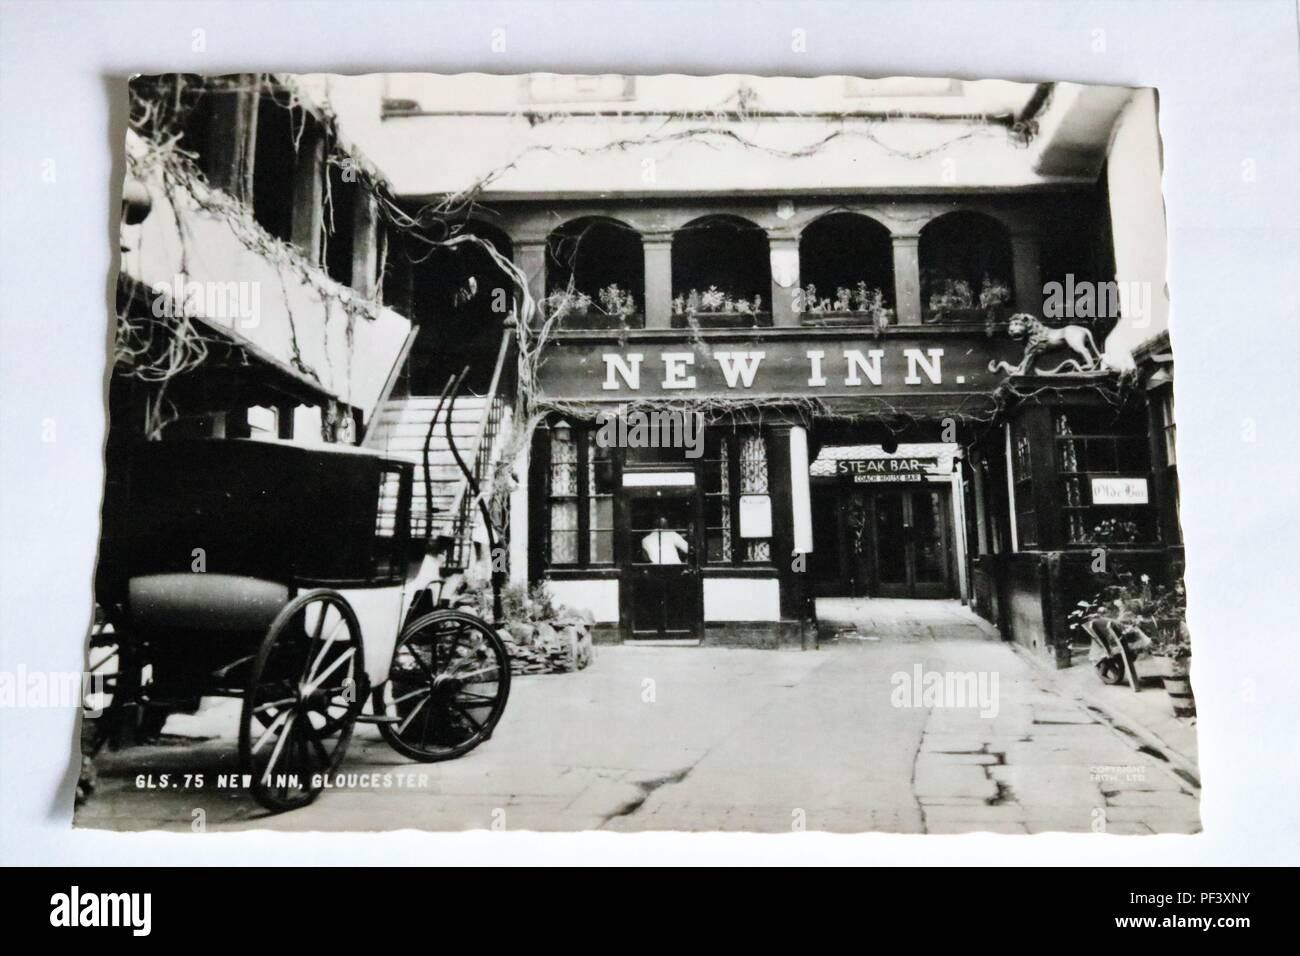 New Inn, Gloucester, UK old black and white photo postcard - early 19th century Stock Photo